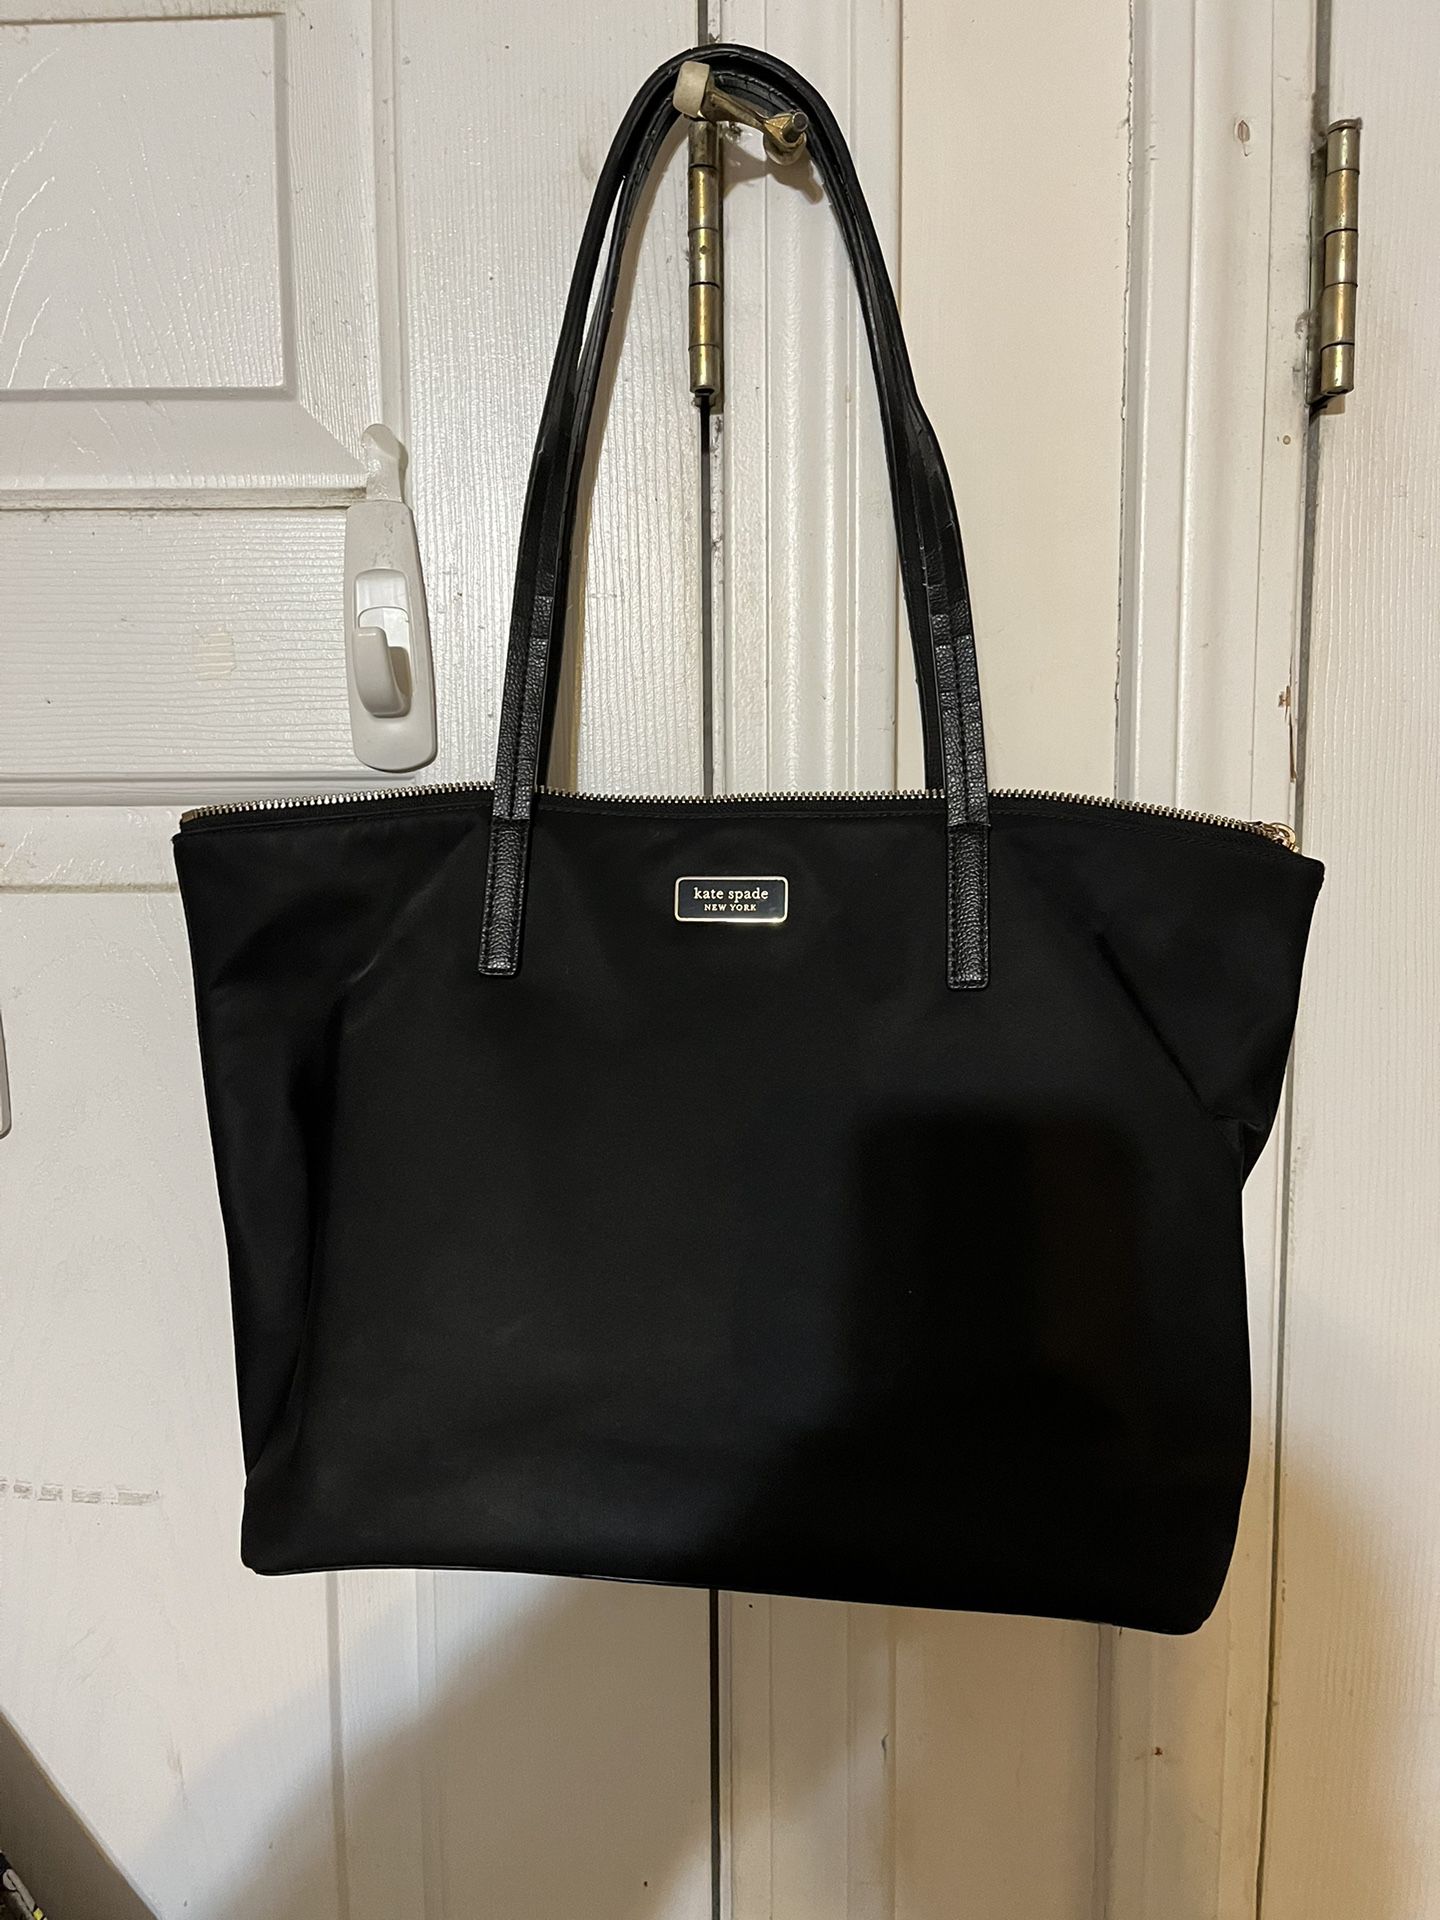 Kate Spade Black Nylon And Leather Medium Size Bag Price Is Firm